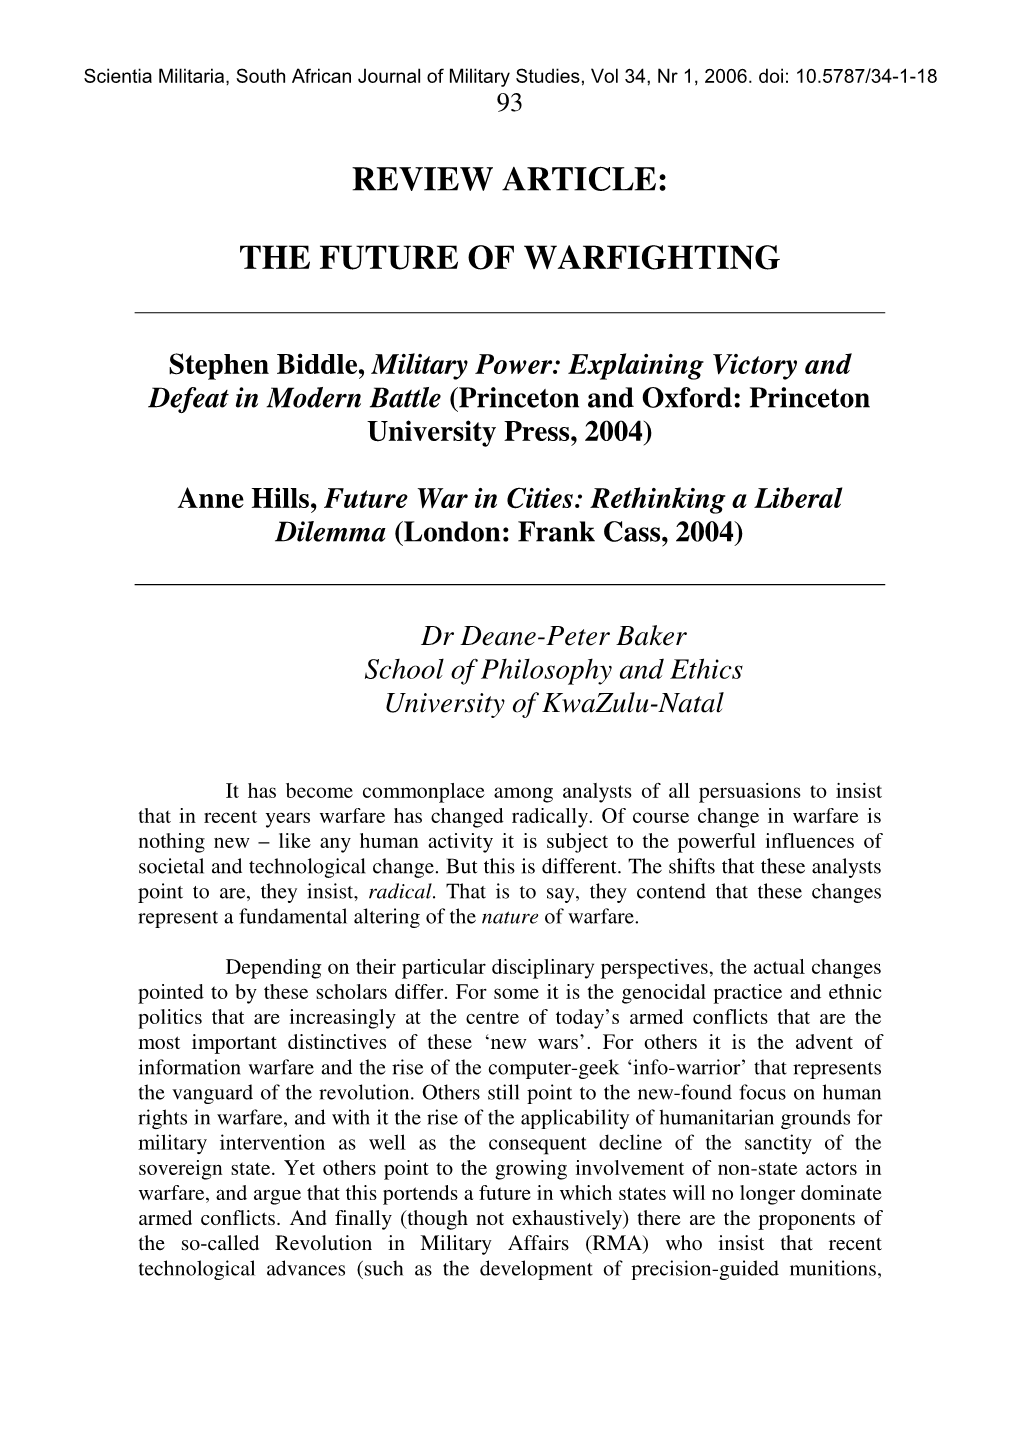 Review Article: the Future of Warfighting